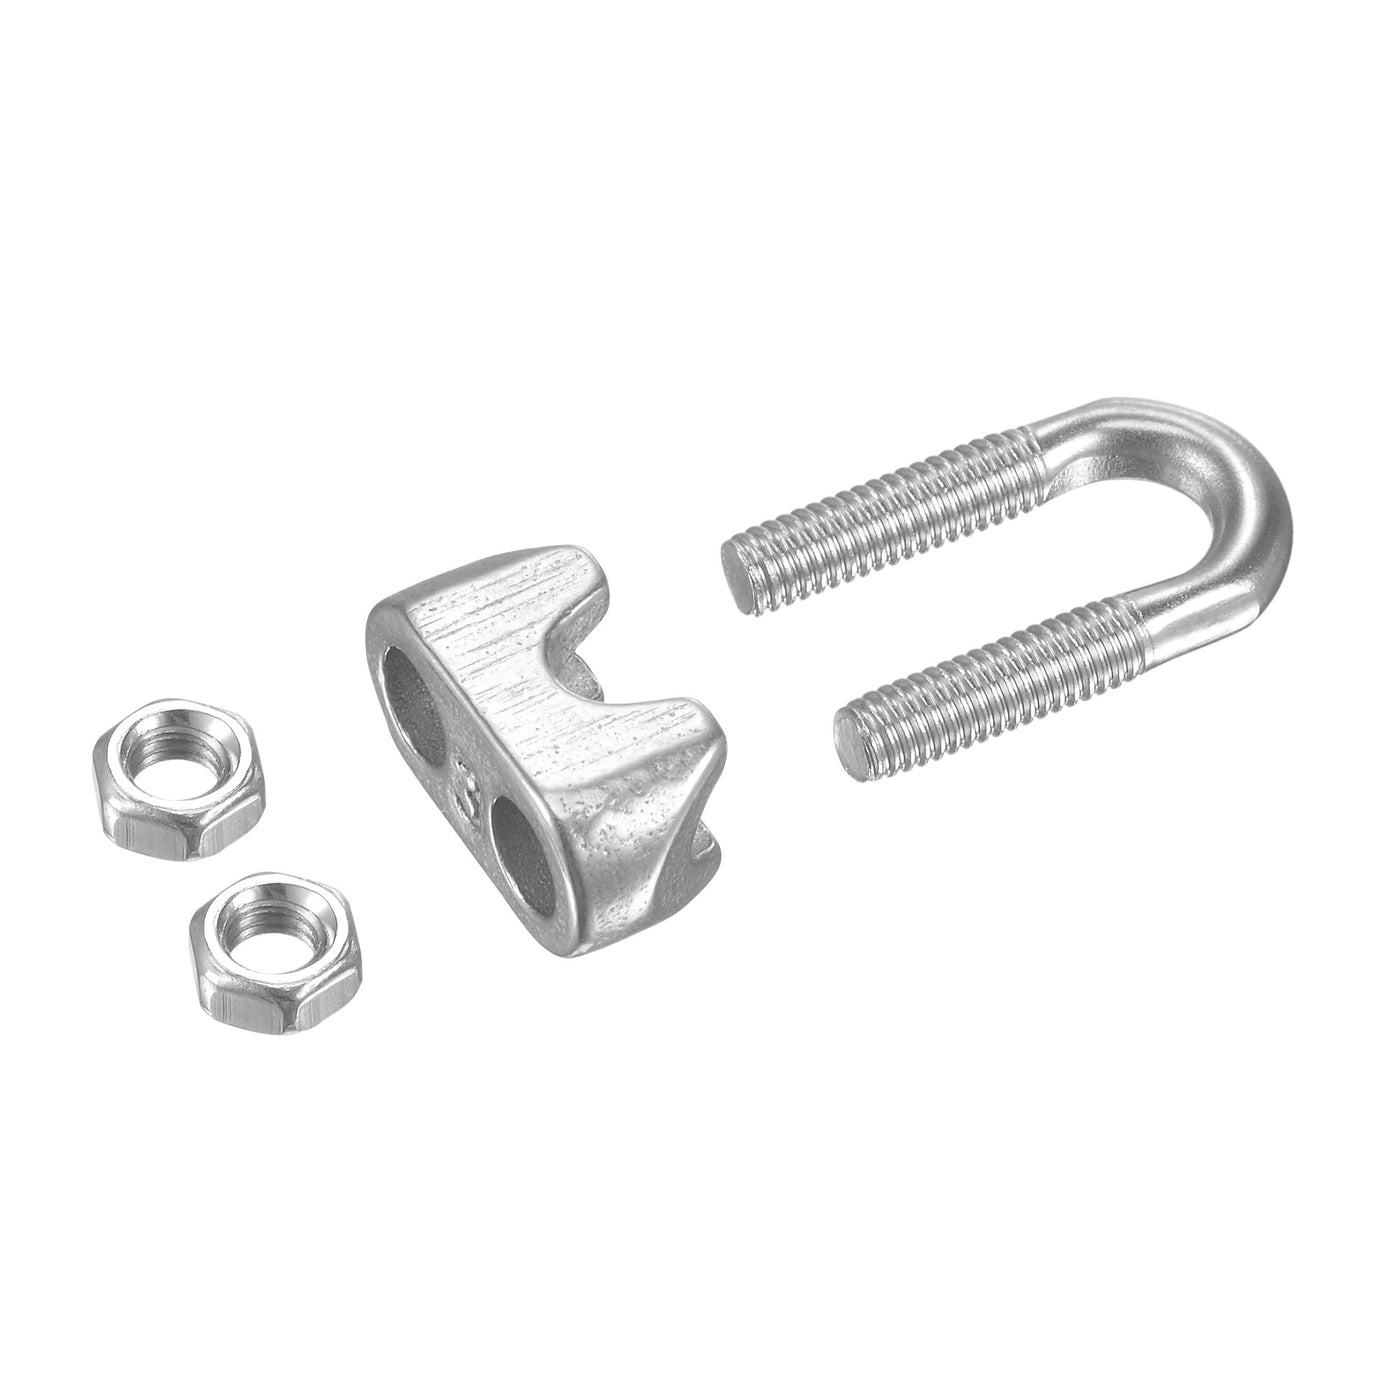 uxcell Uxcell Wire Rope Cable Clip Kit for M3, Included Rope Clamp 10Pcs and Thimble Rigging 10Pcs, 304 Stainless Steel U Bolt Saddle Fastener